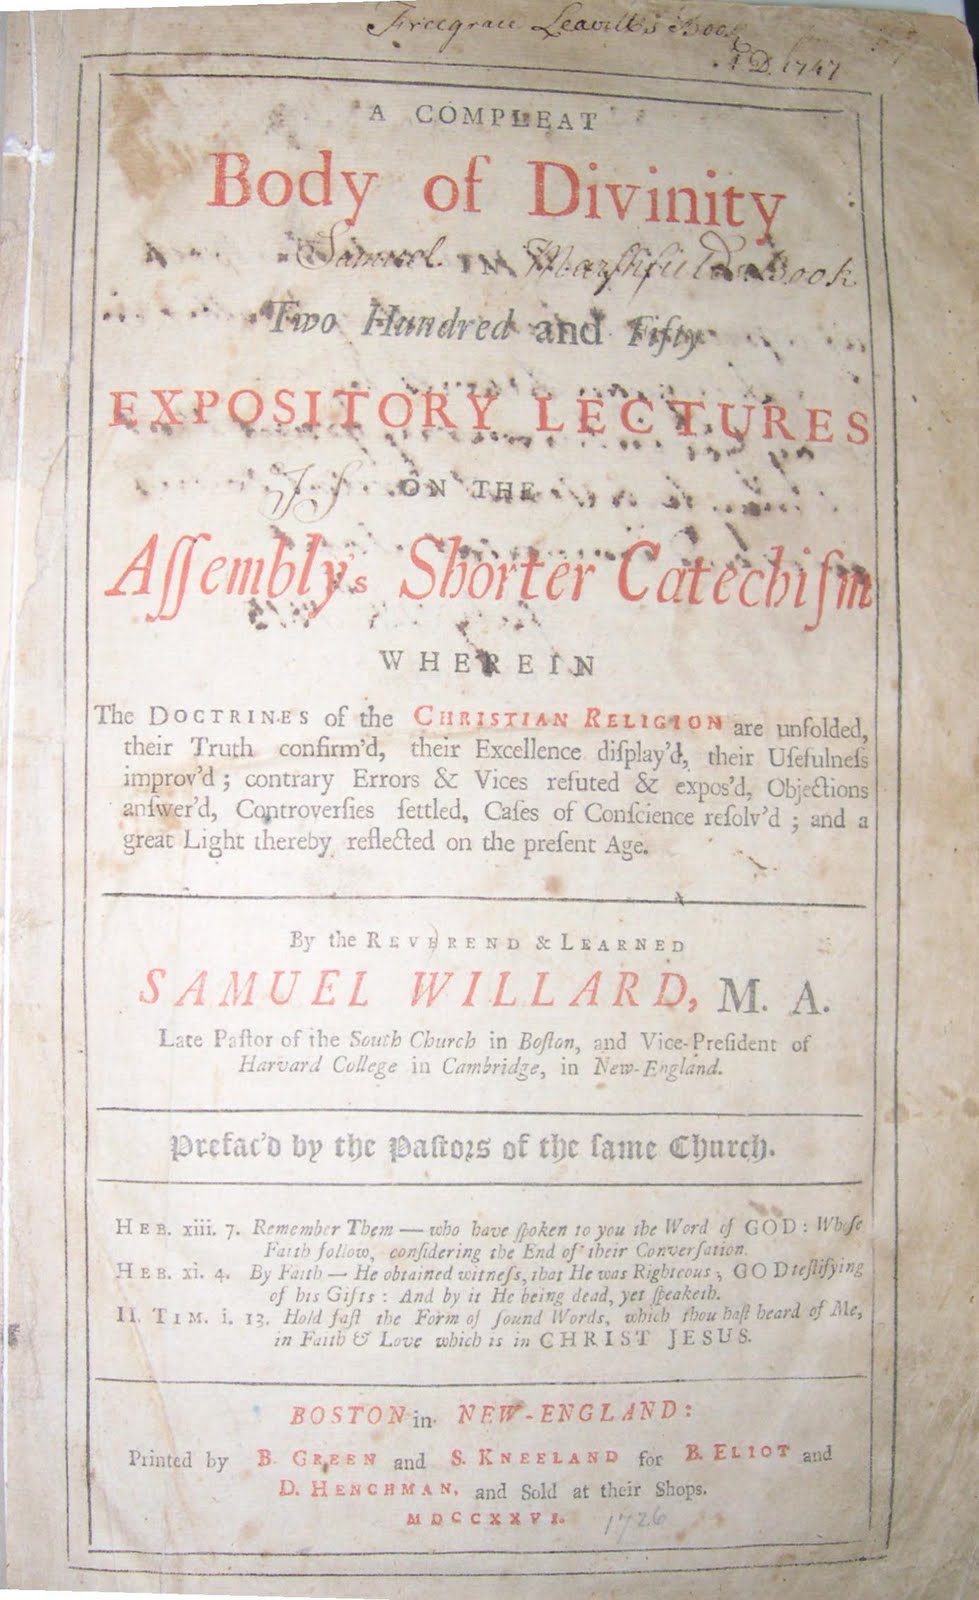 Title page of "A Compleat Body of Divinity, 250 Expository Lectures on the Assembly's Shorter Catechisms"